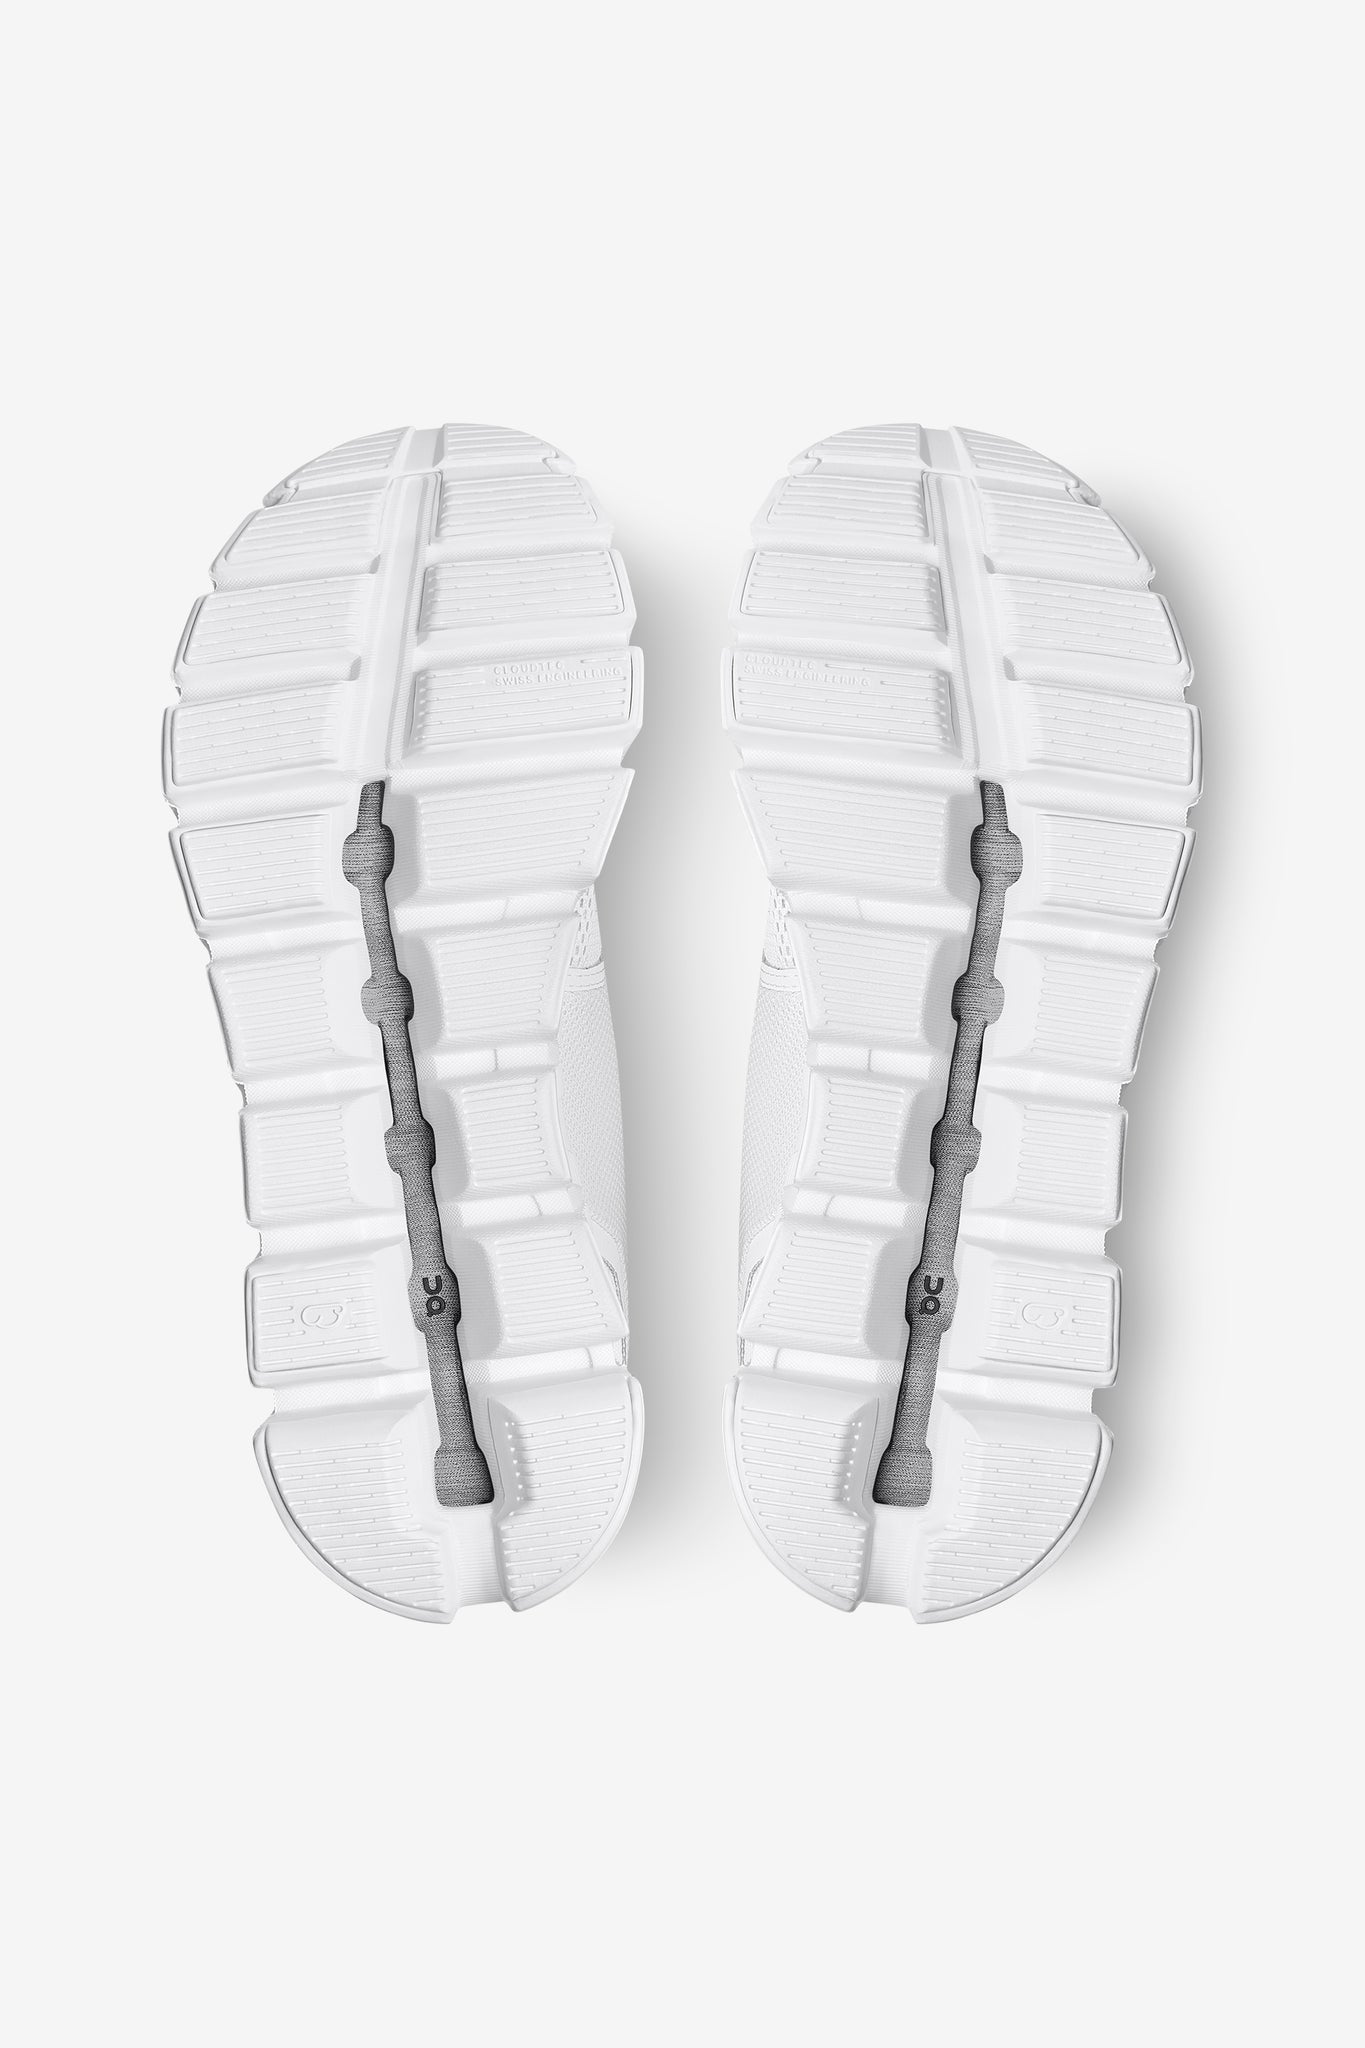 ON | Men's Cloud 5 in All White